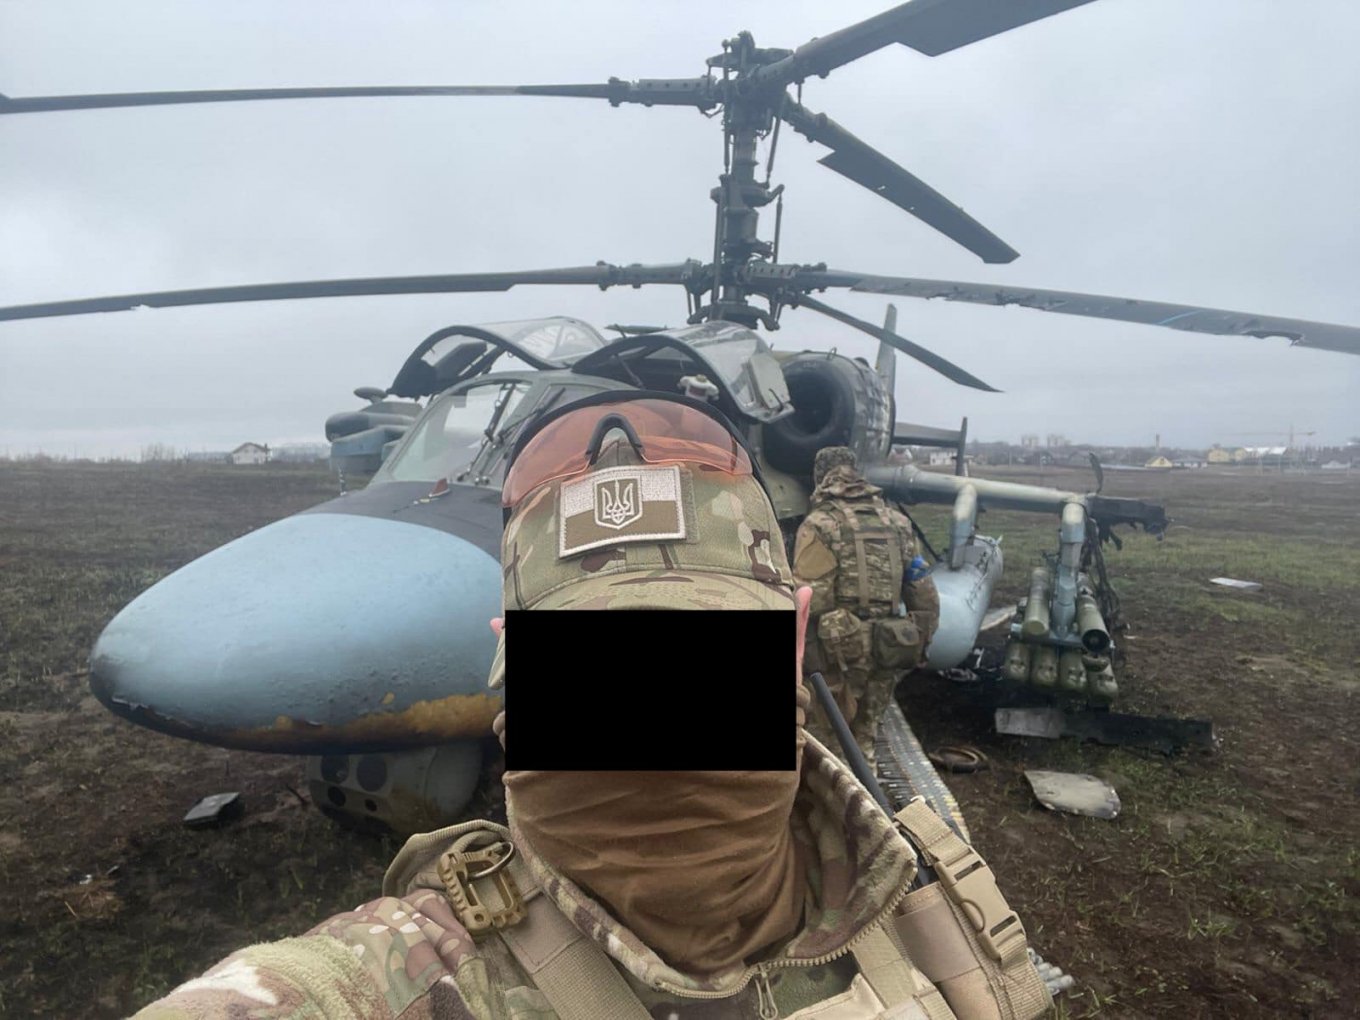 Ukrainian troops captured downed but almost intact Russian attack chopper Ka-52 ‘Alligator’, Defense Express